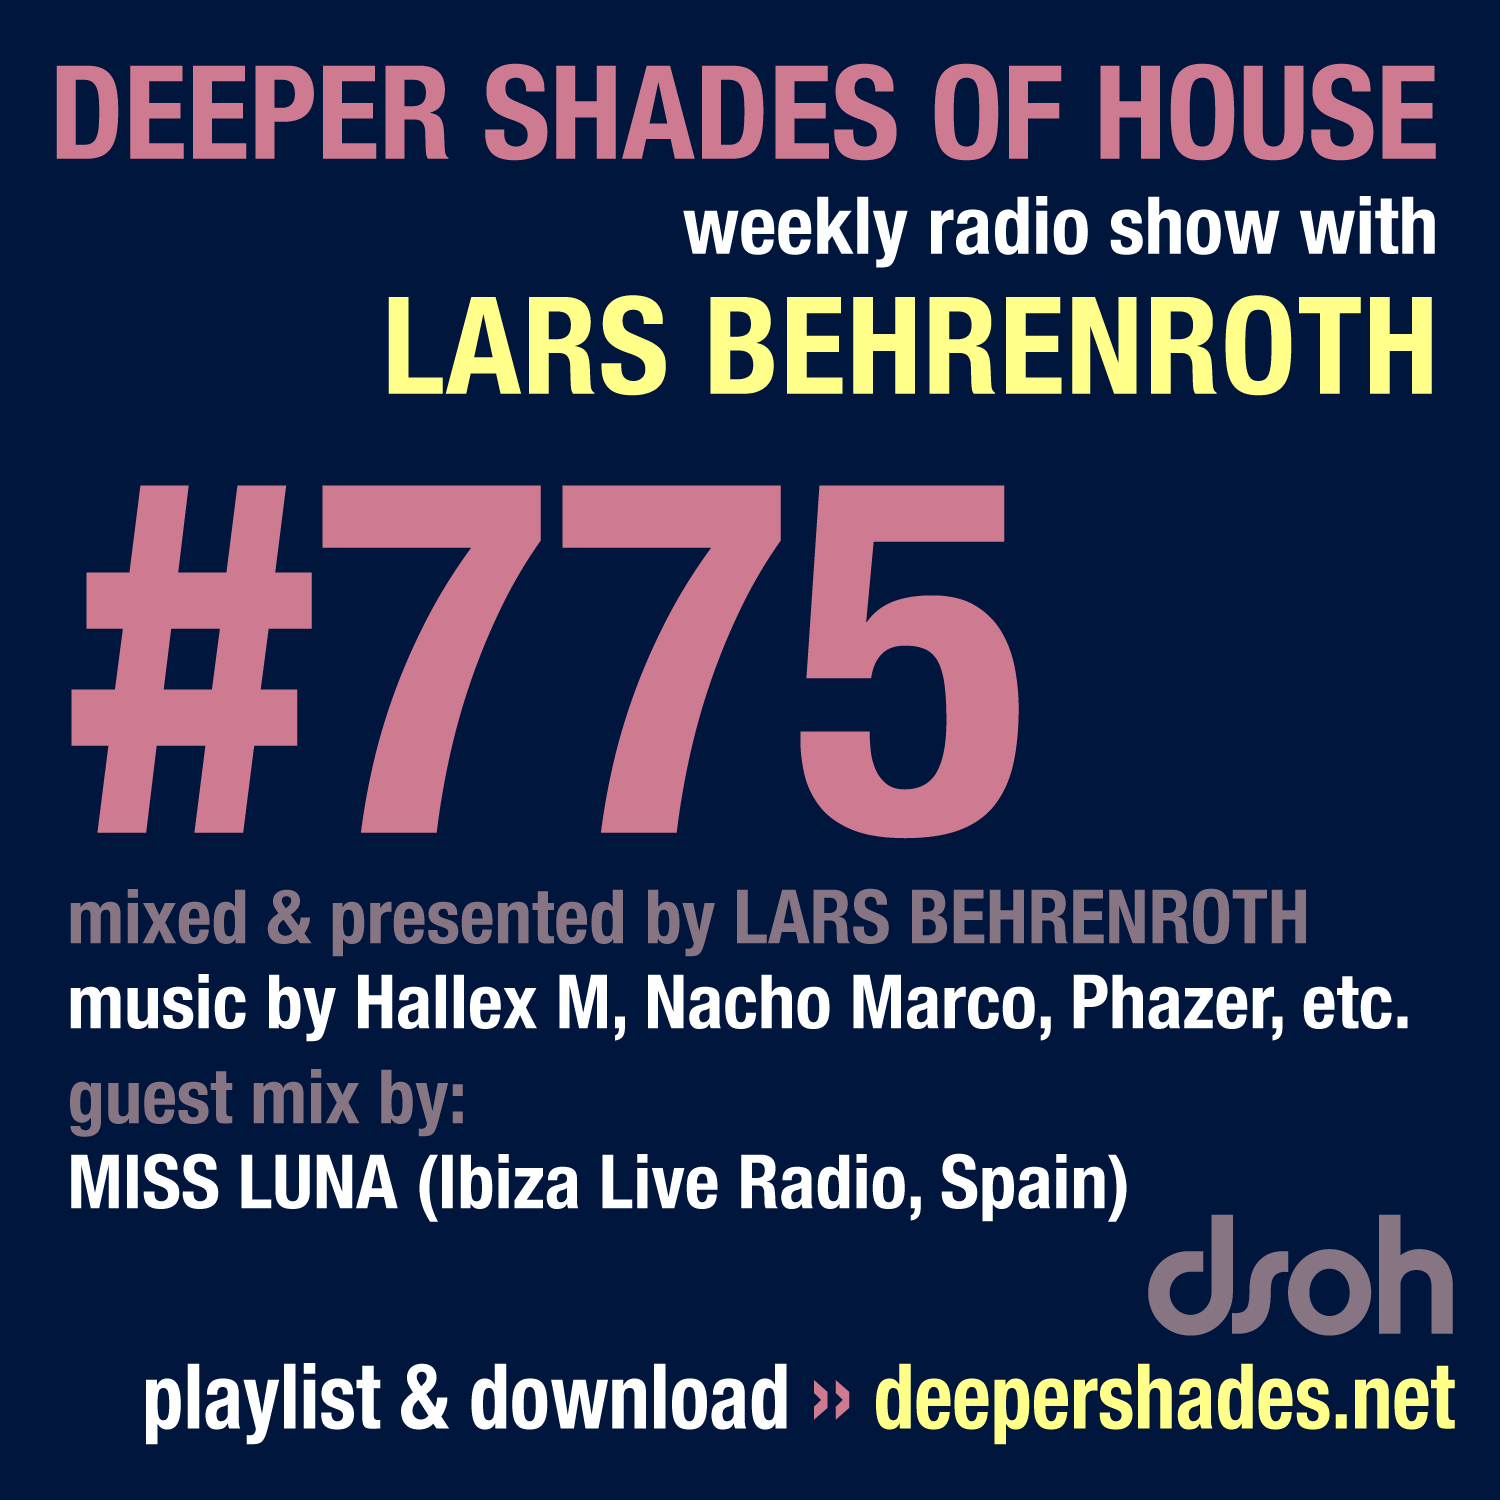 Deeper Shades Of House 775